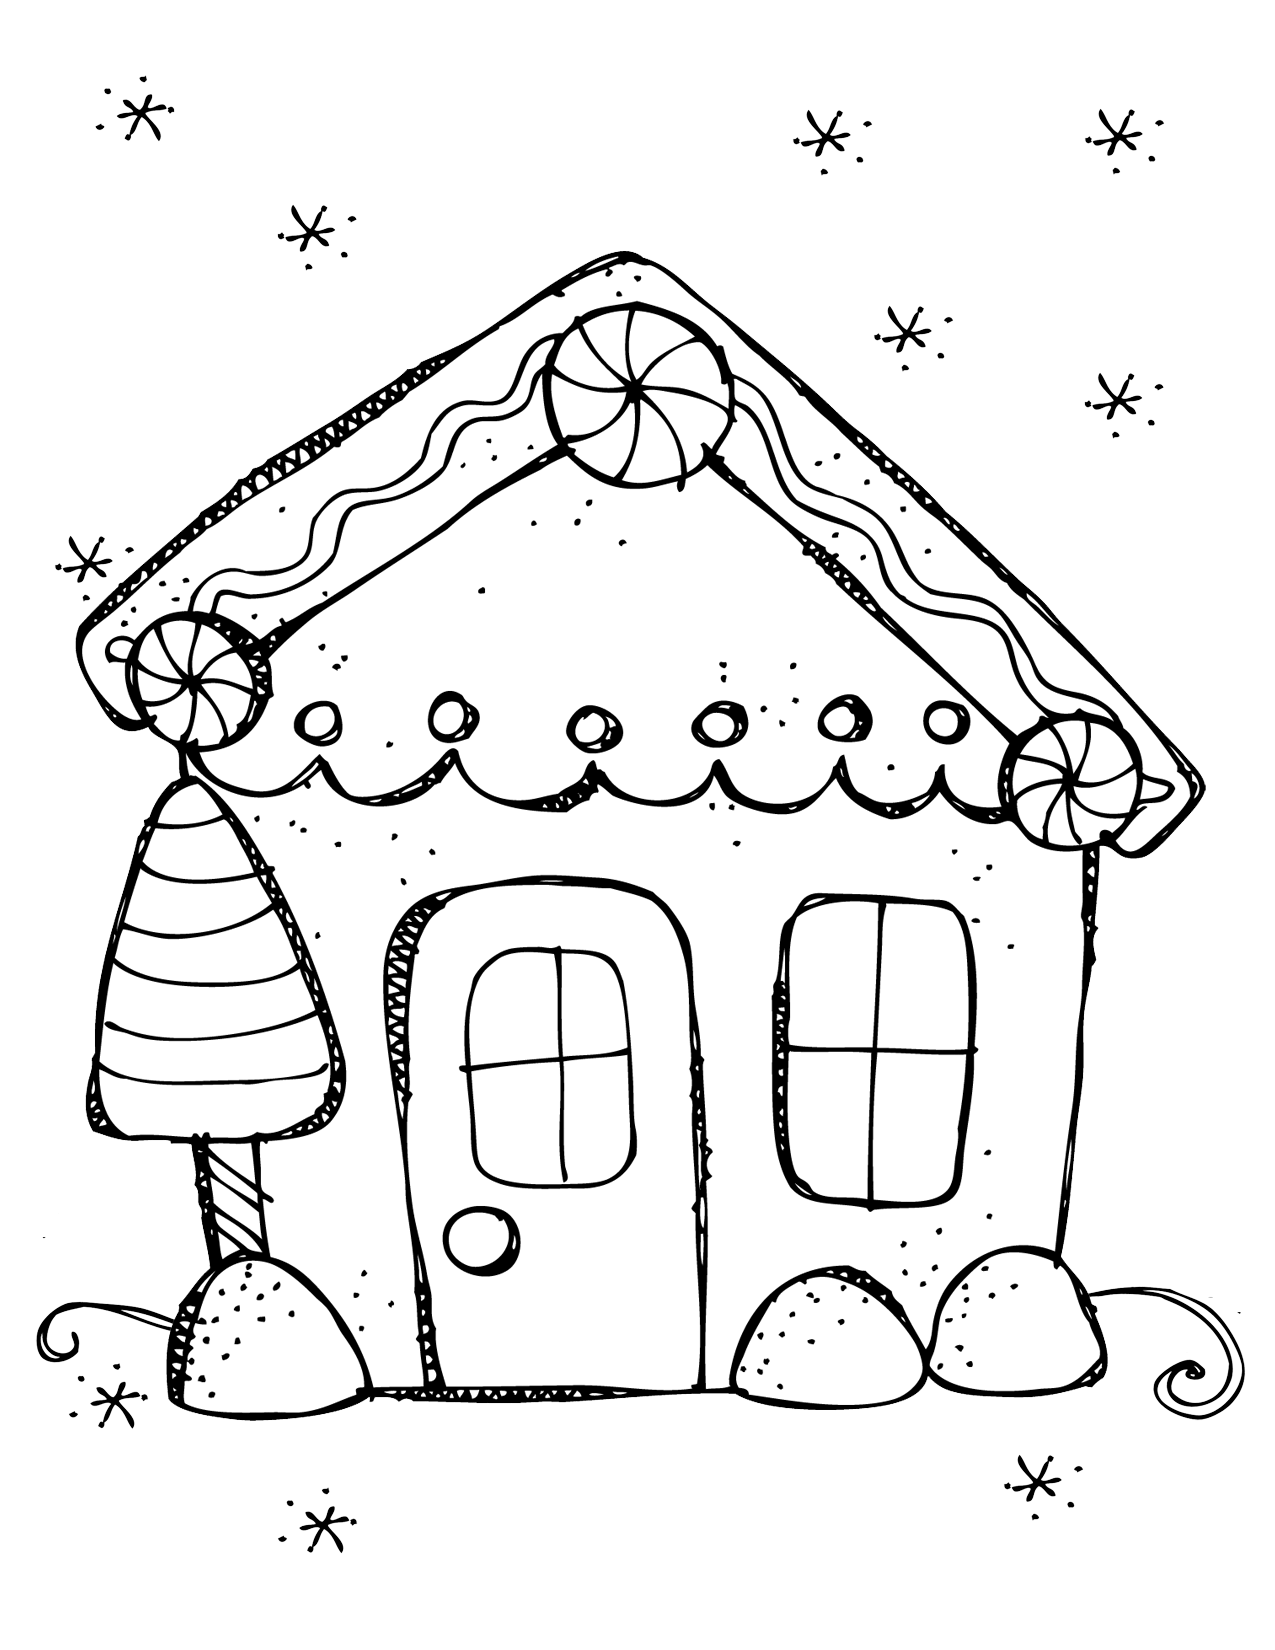 Simple Gingerbread House Coloring Page2